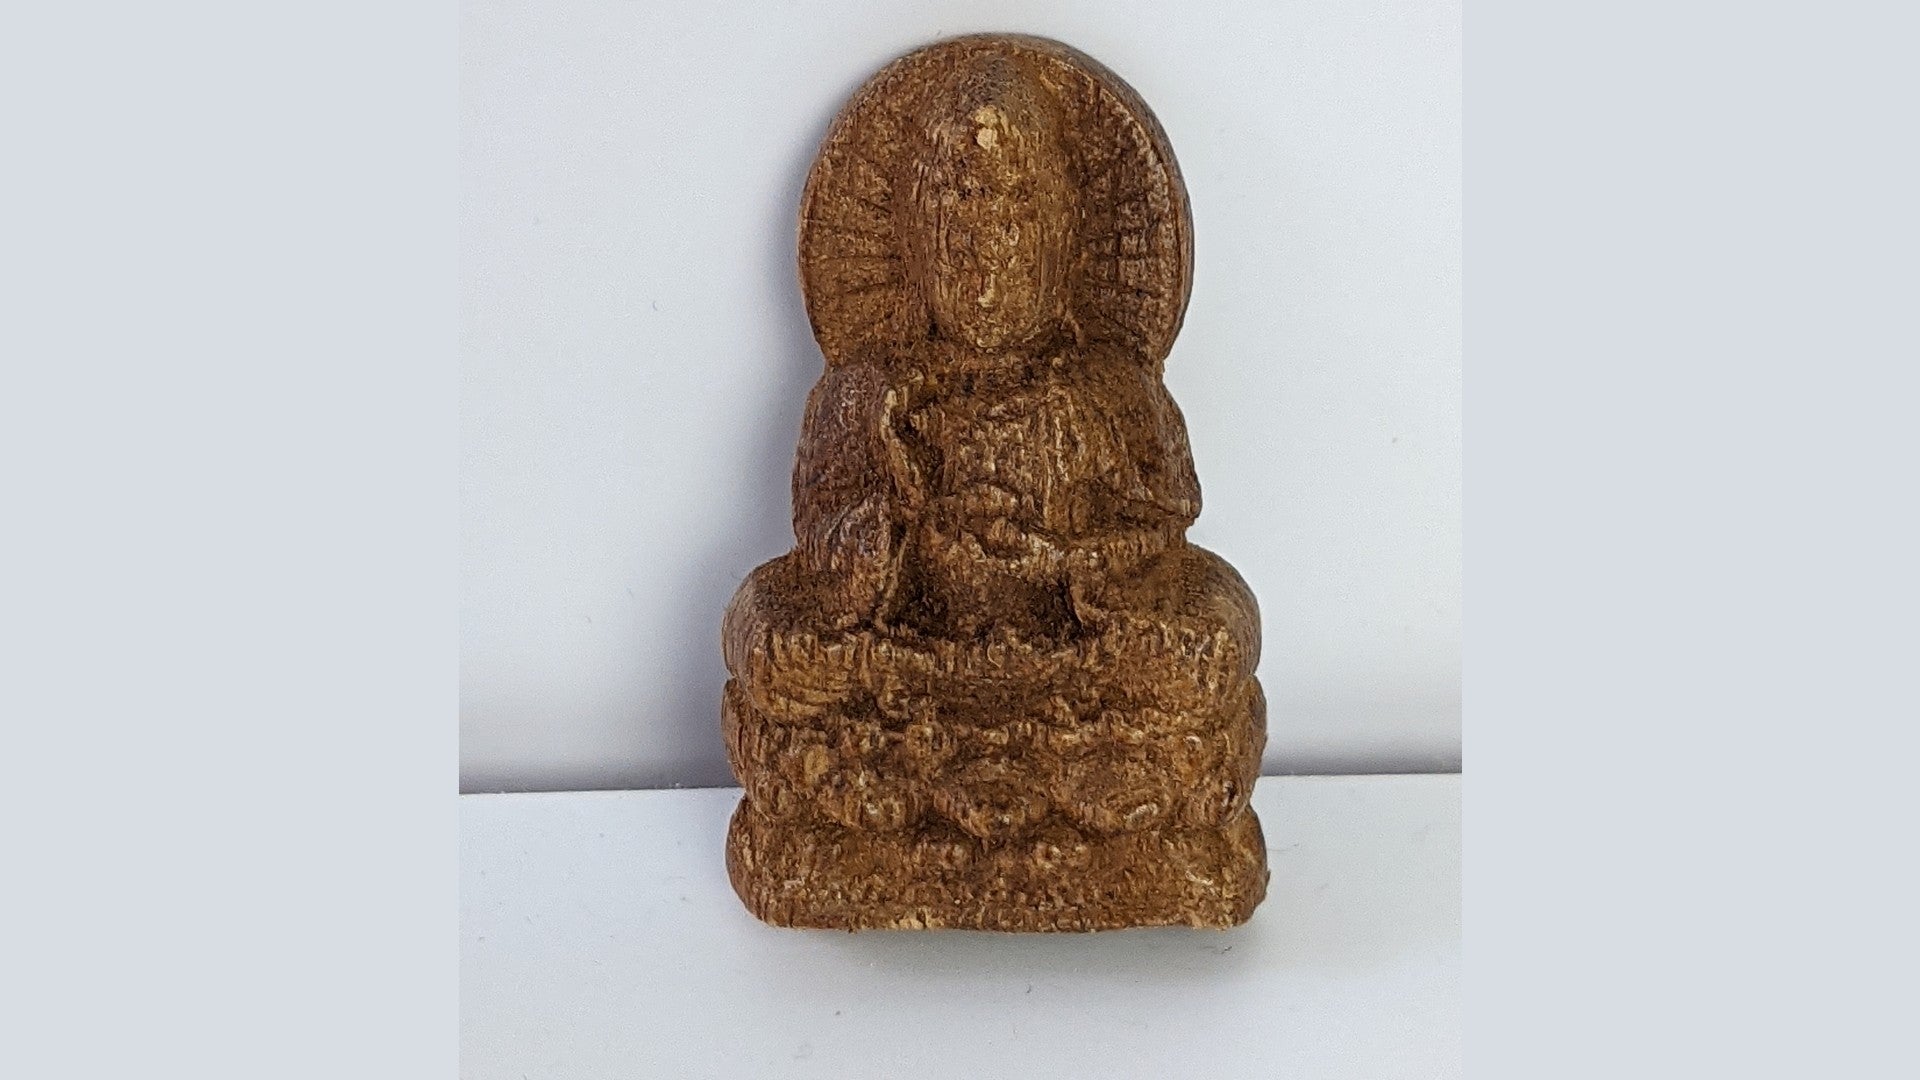 Cultivated Agarwood Pendant Guan Yin The Goddess of Mercy and Mi Le Laughing Buddha -